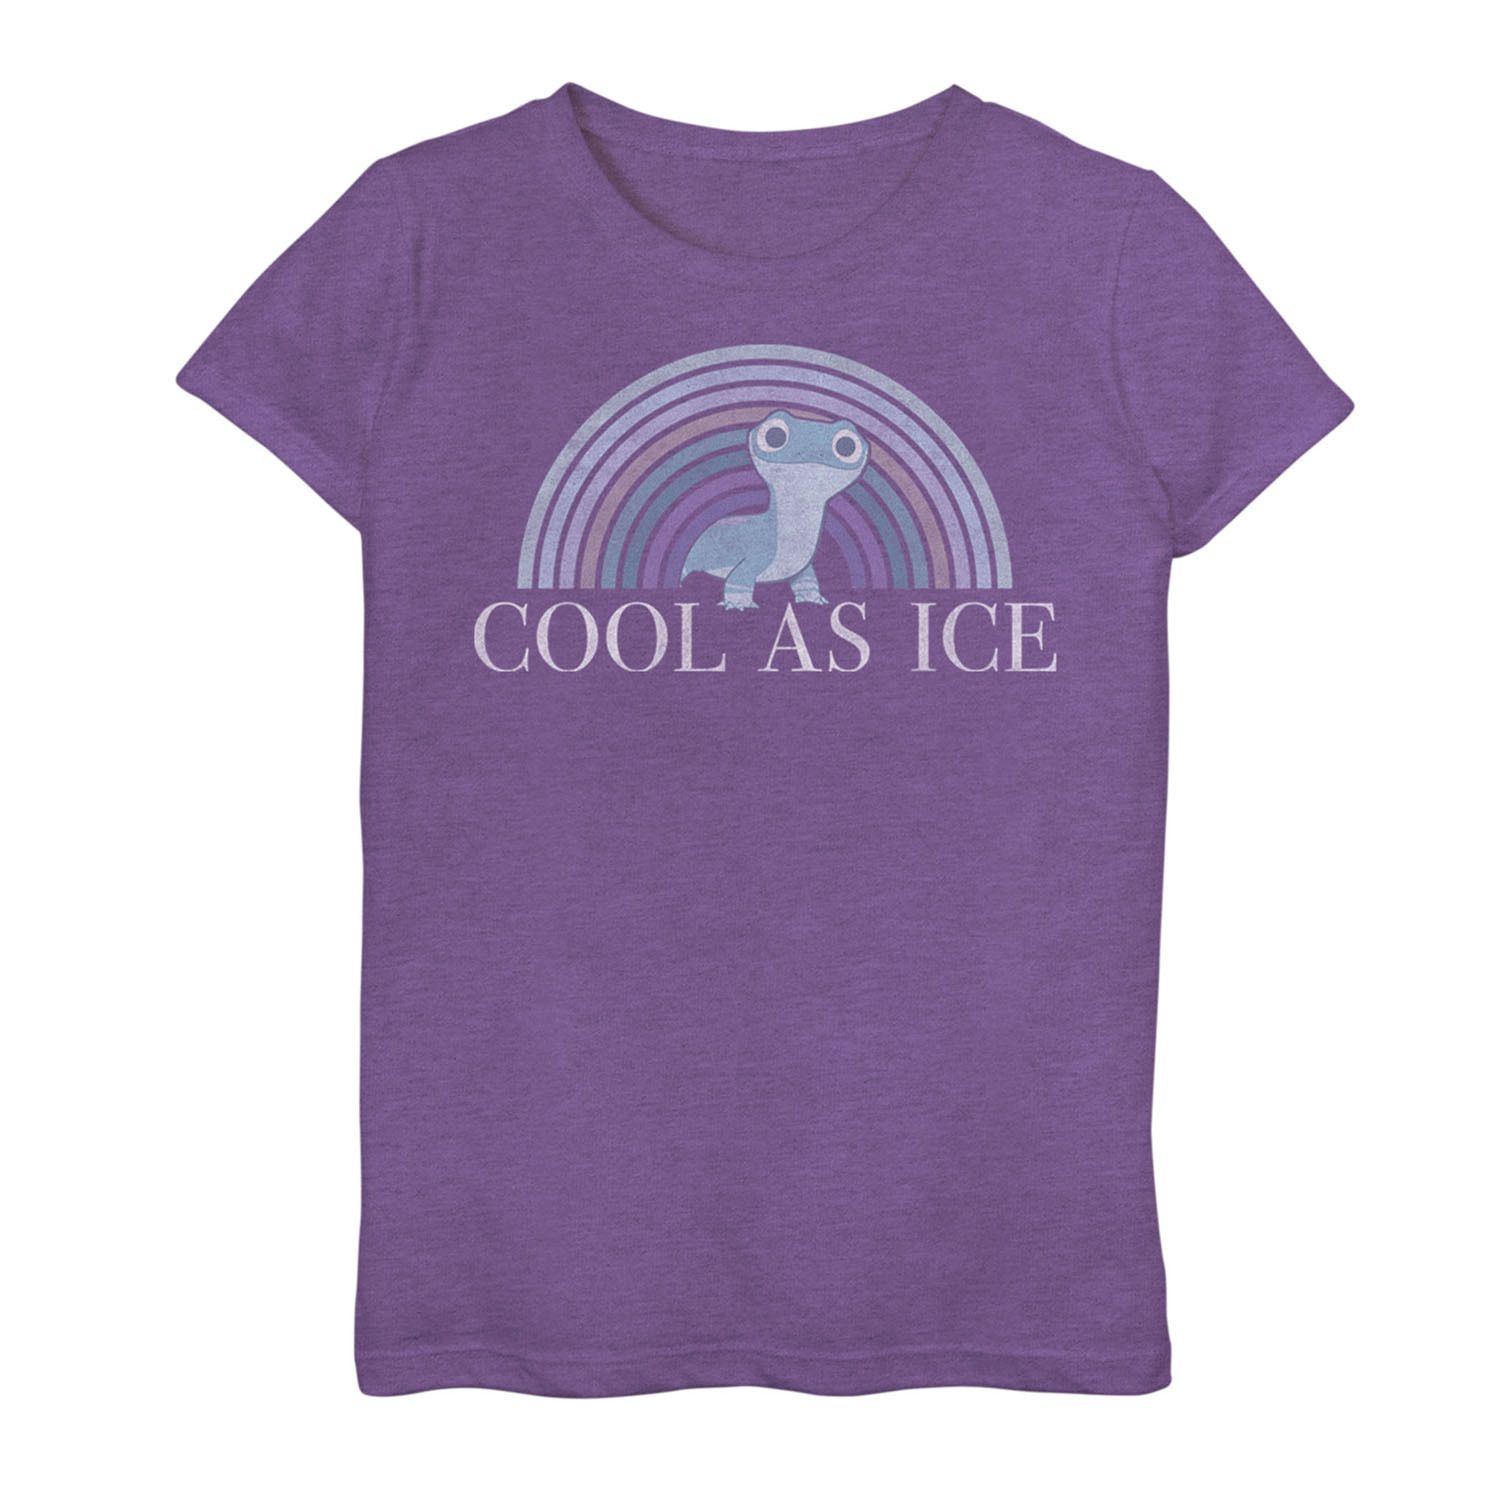 Image for Disney Girls 7-16 's Frozen 2 Bruni Cool As Ice Tee at Kohl's.